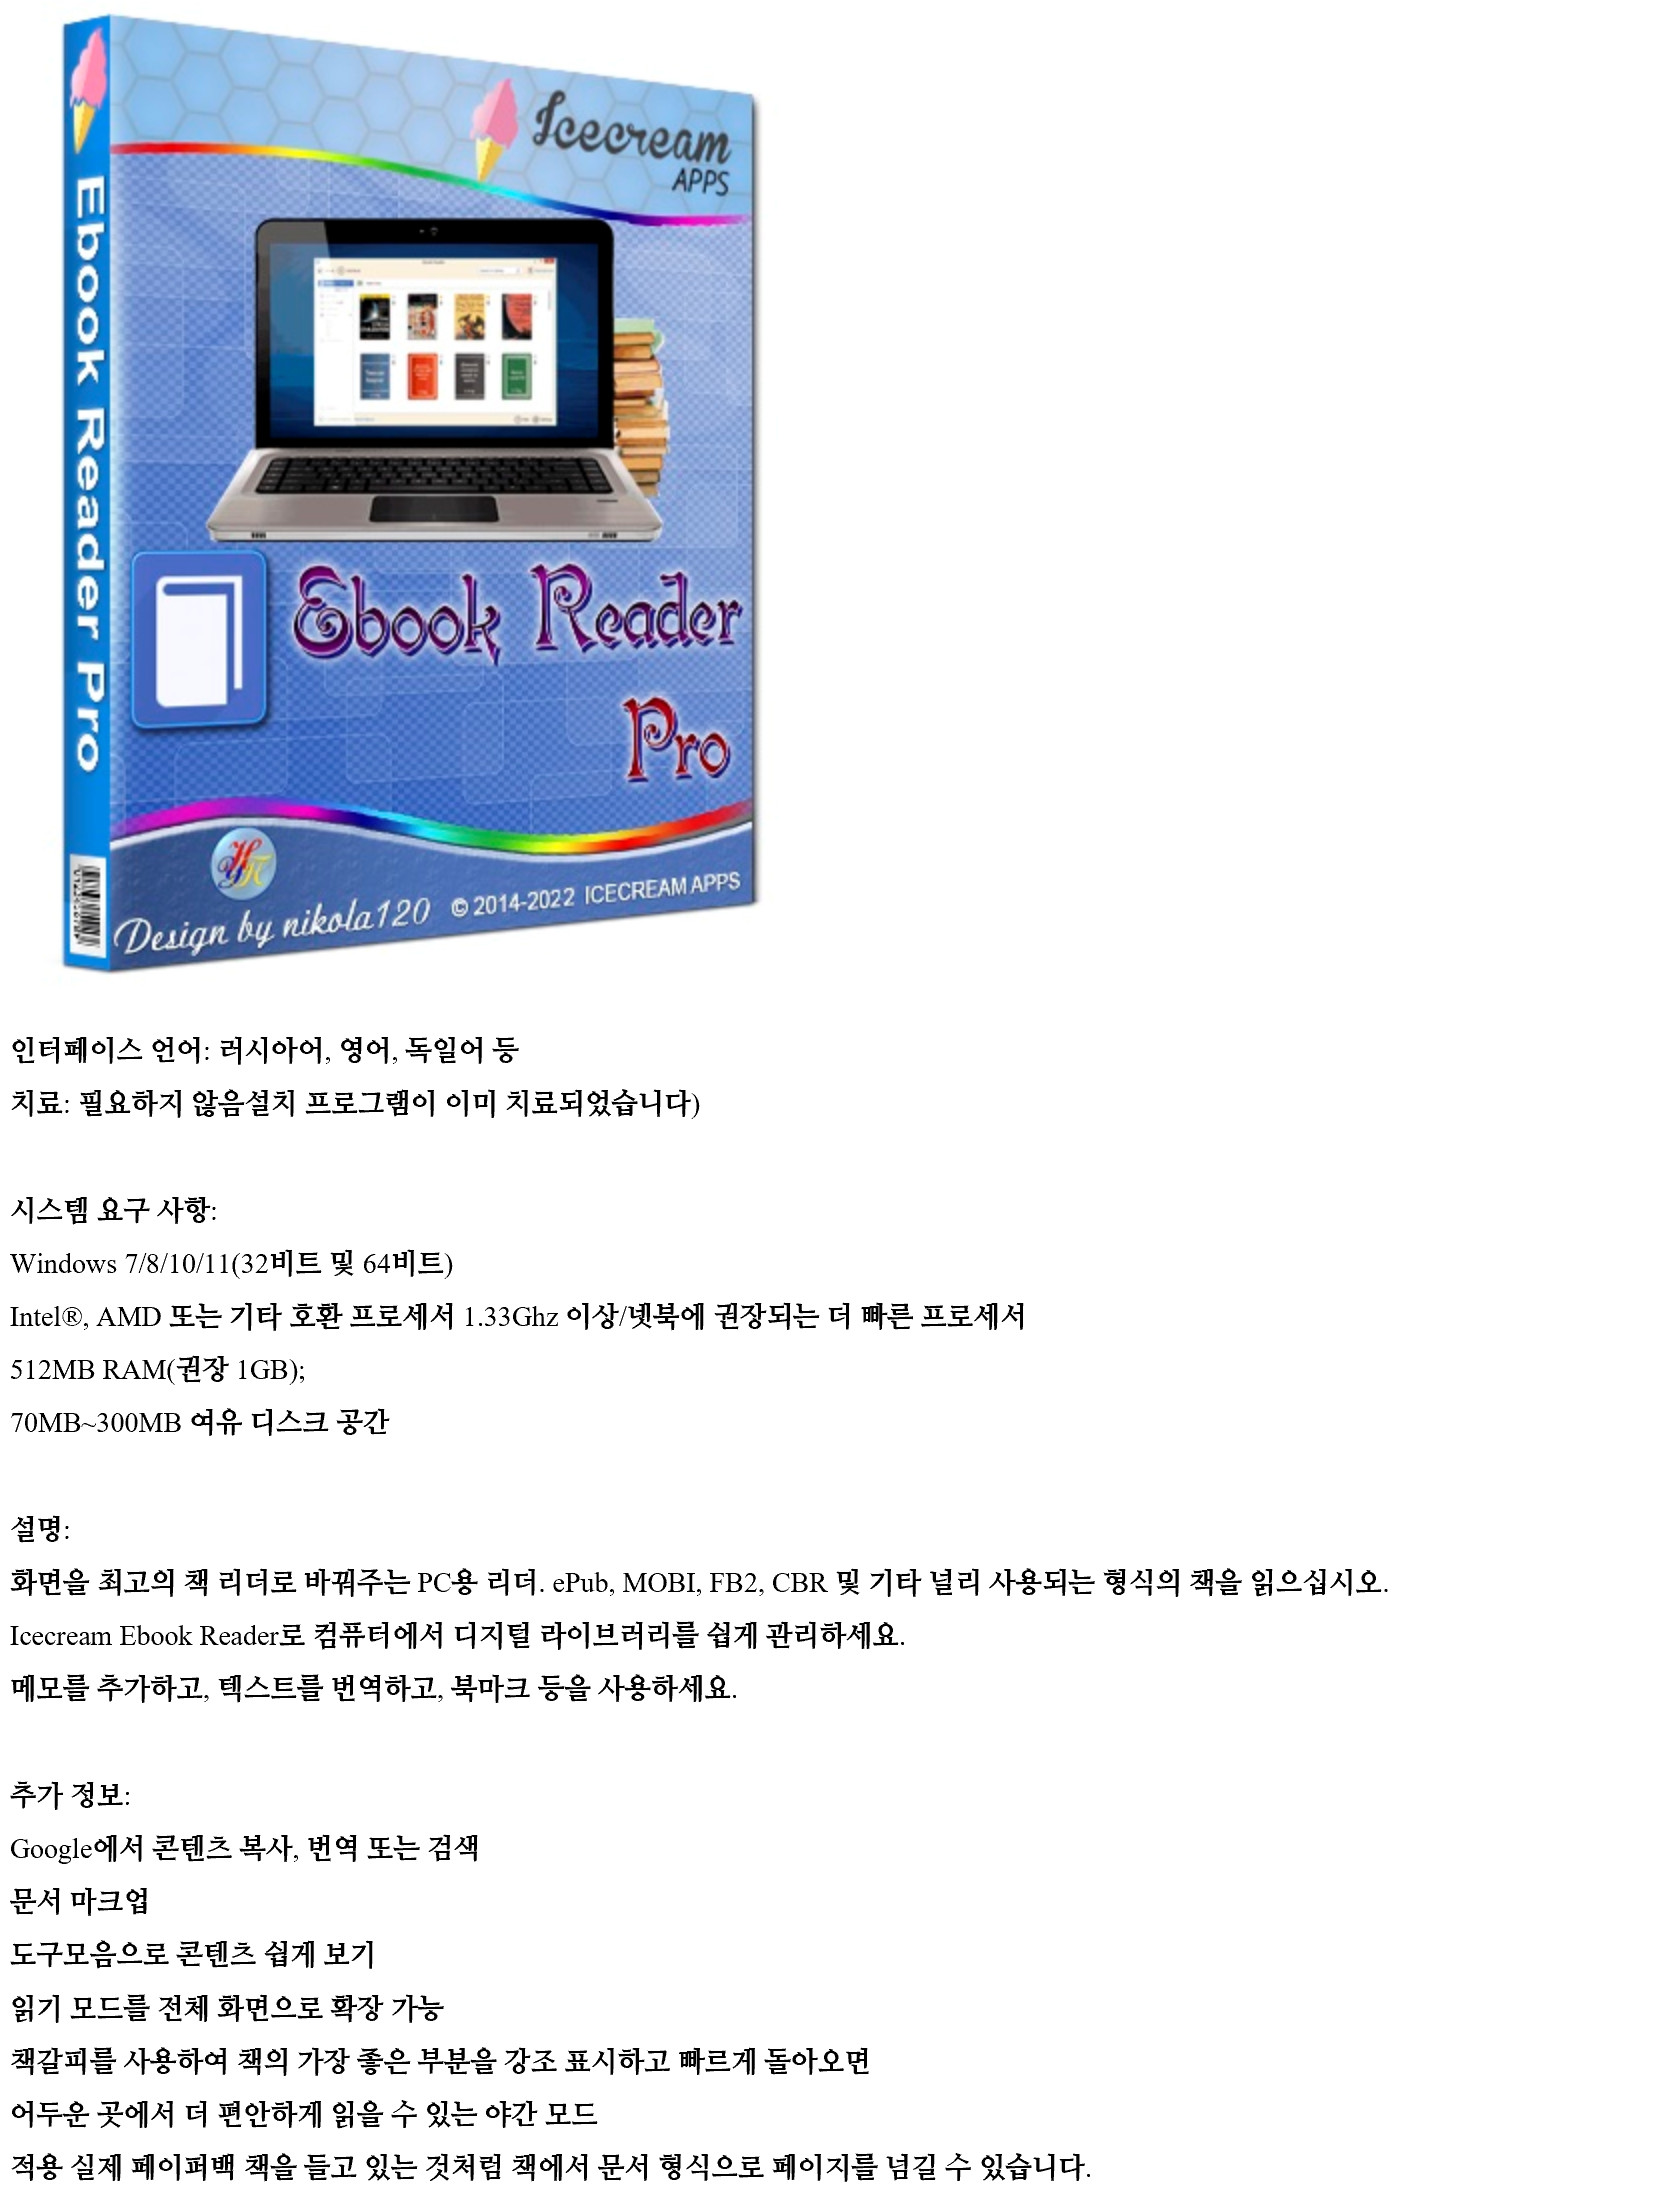 IceCream Ebook Reader 6.37 Pro download the new version for apple